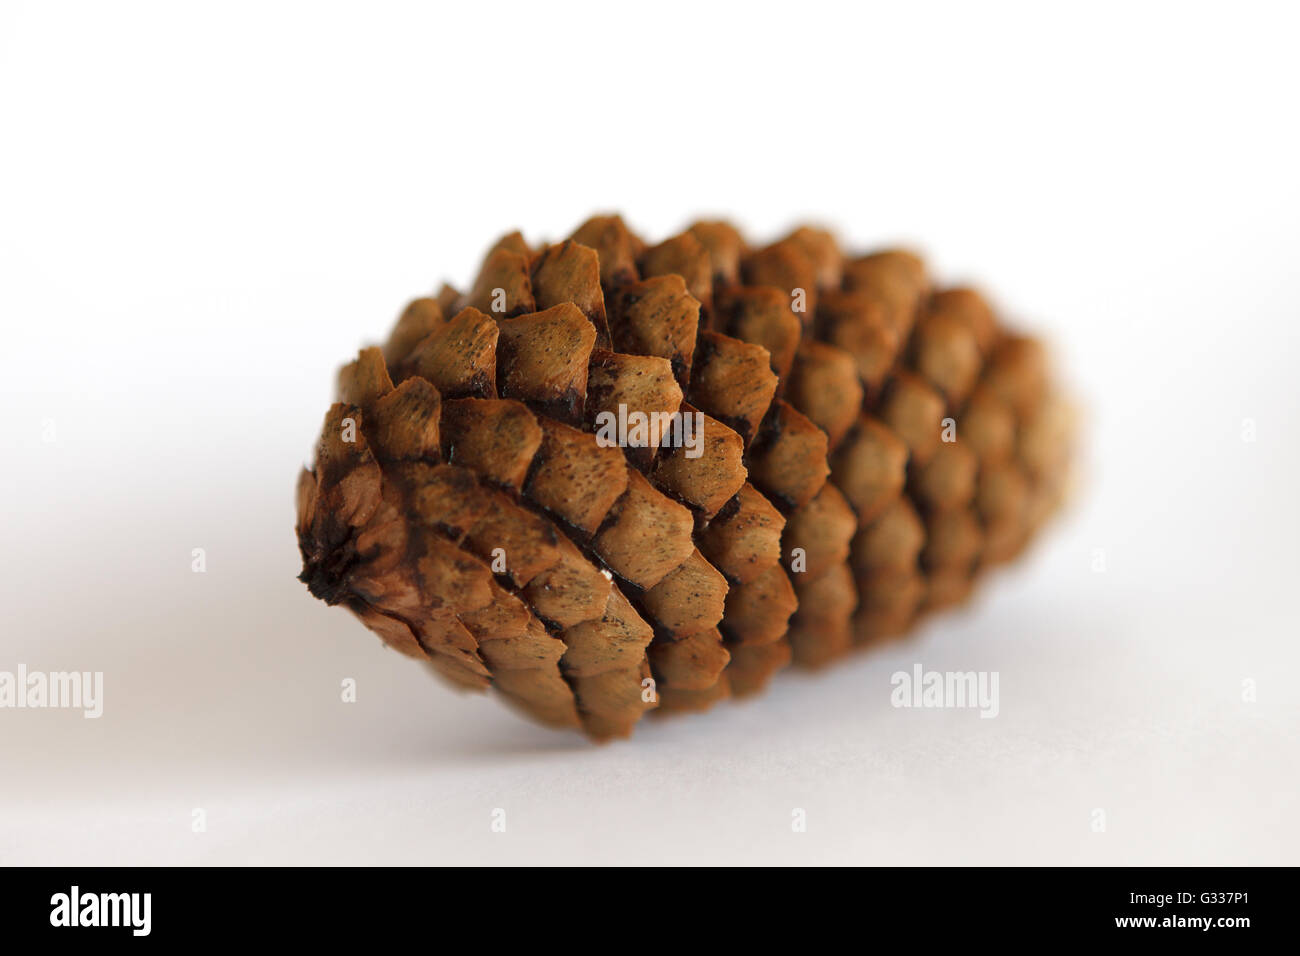 Fir tree cones on a white background Stock Photo